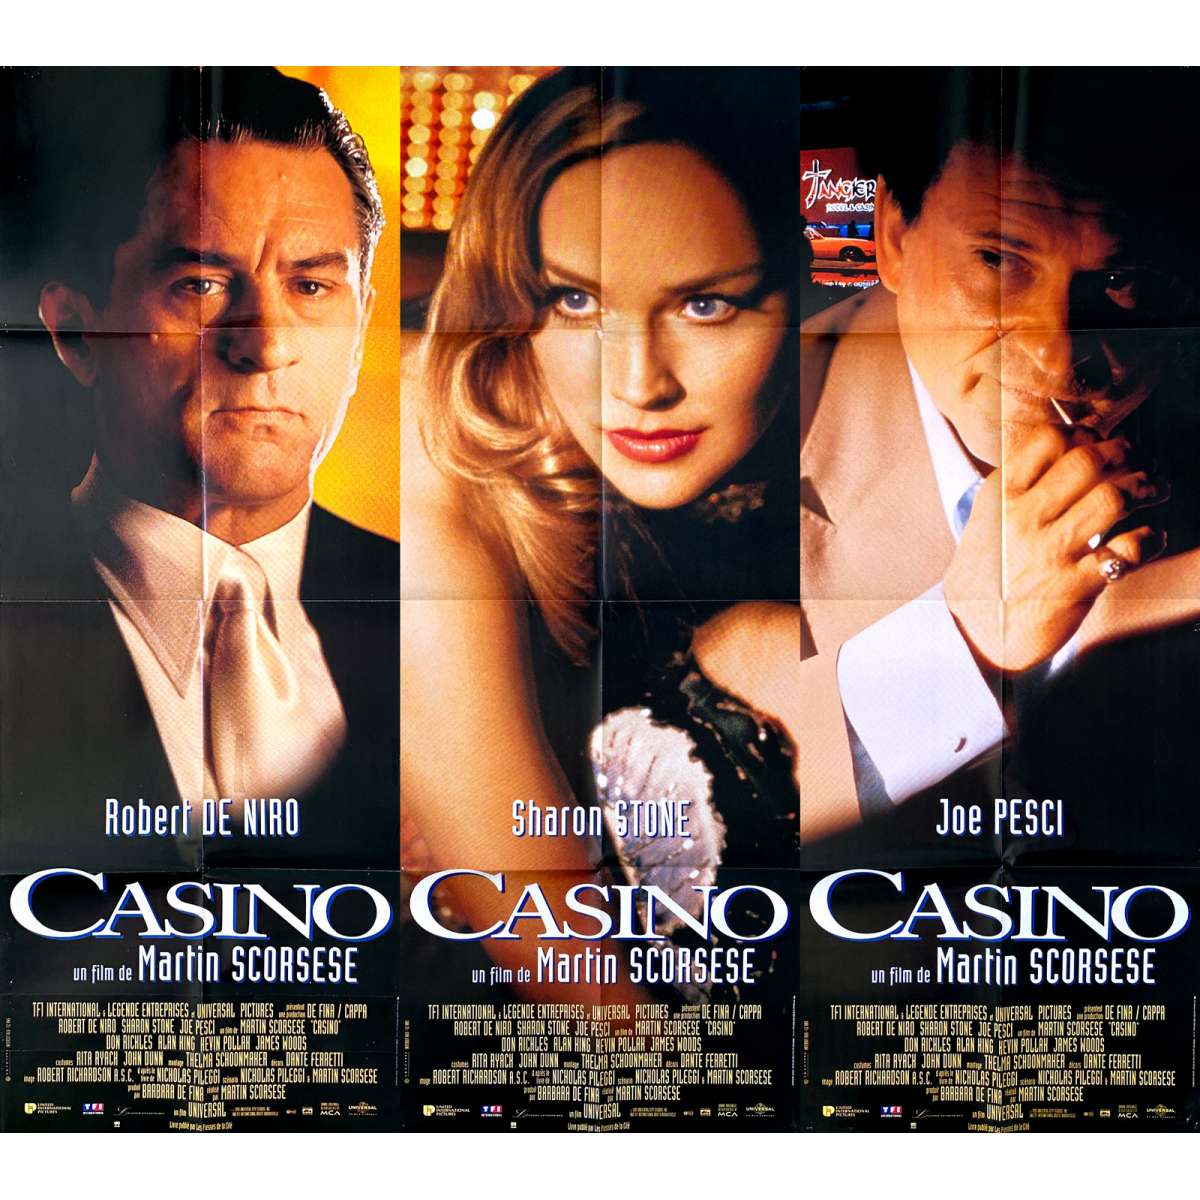 Learn How To Platinumplayreview casino Persuasively In 3 Easy Steps